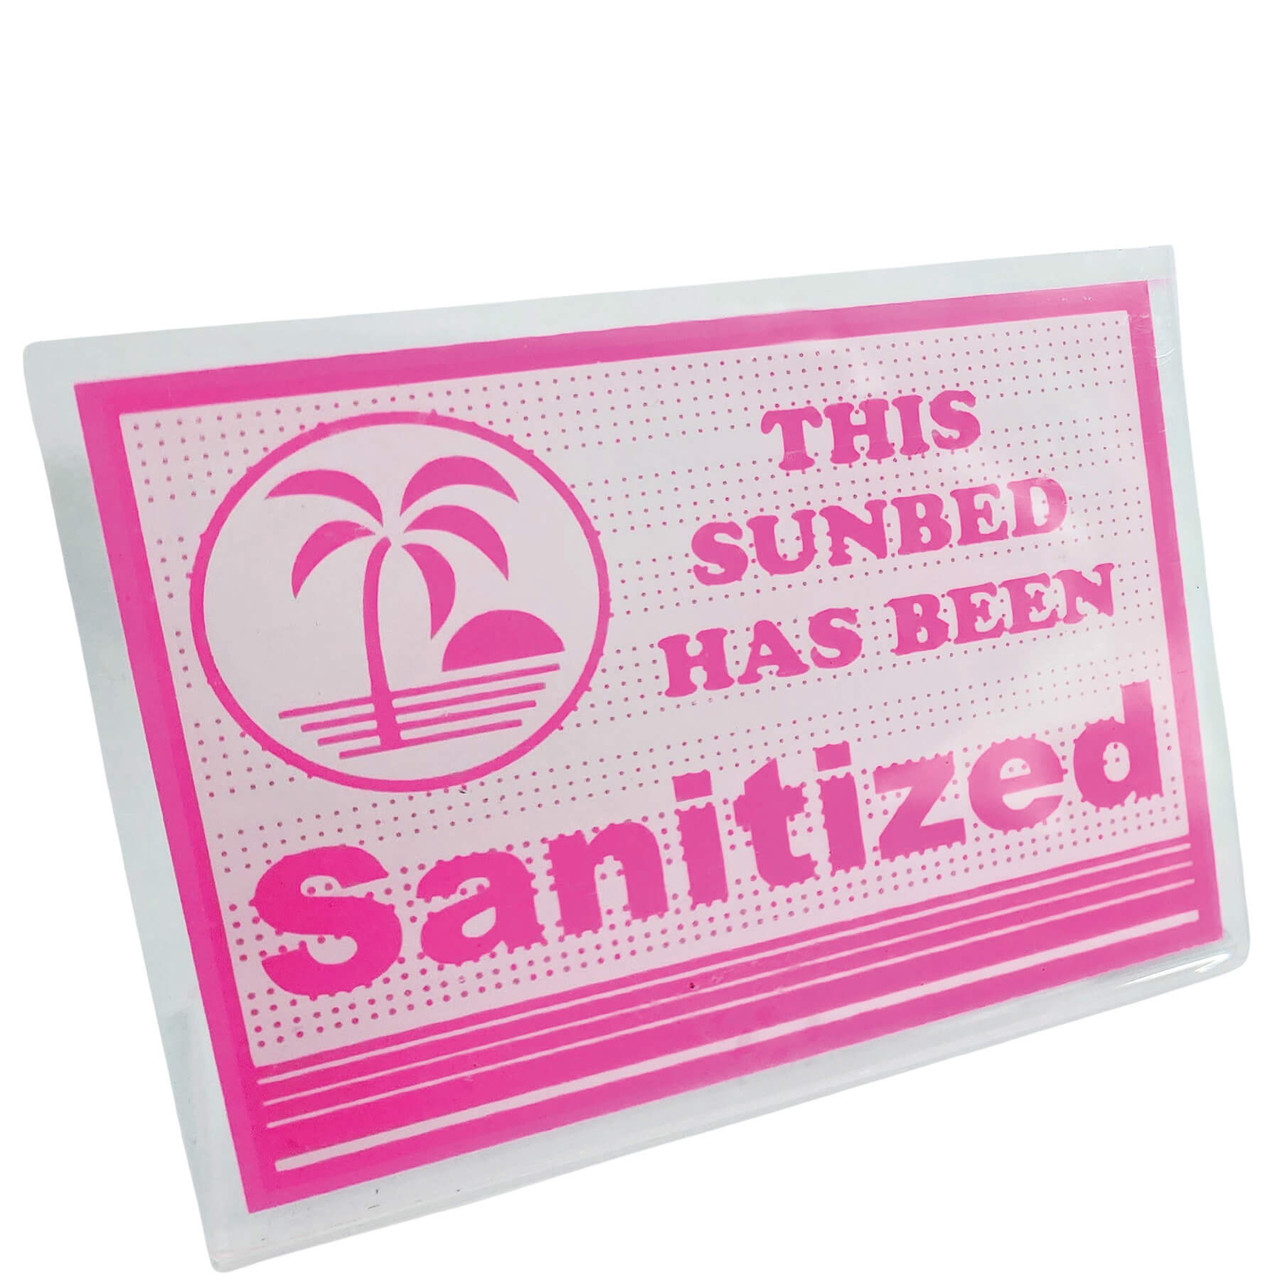 Sanitized Acrylic Bed Sign Pink